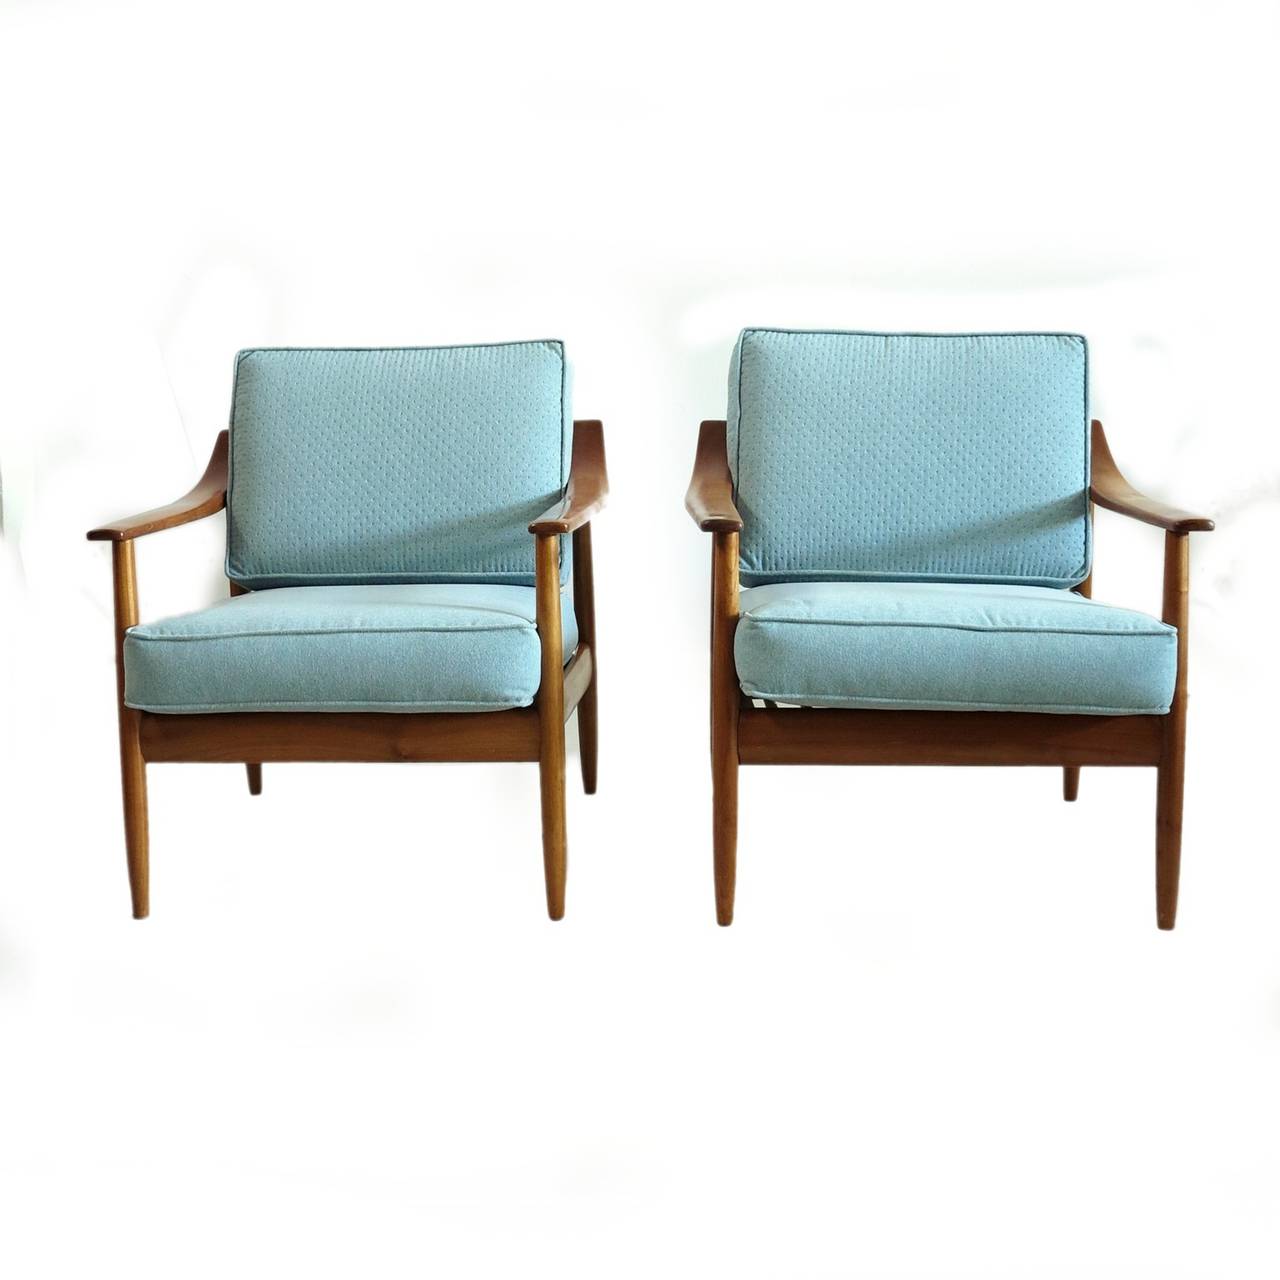 Set of two armchairs with new upholstered in turquoise blue. Designed by Wilhelm Knoll. The wood is in very good condition.